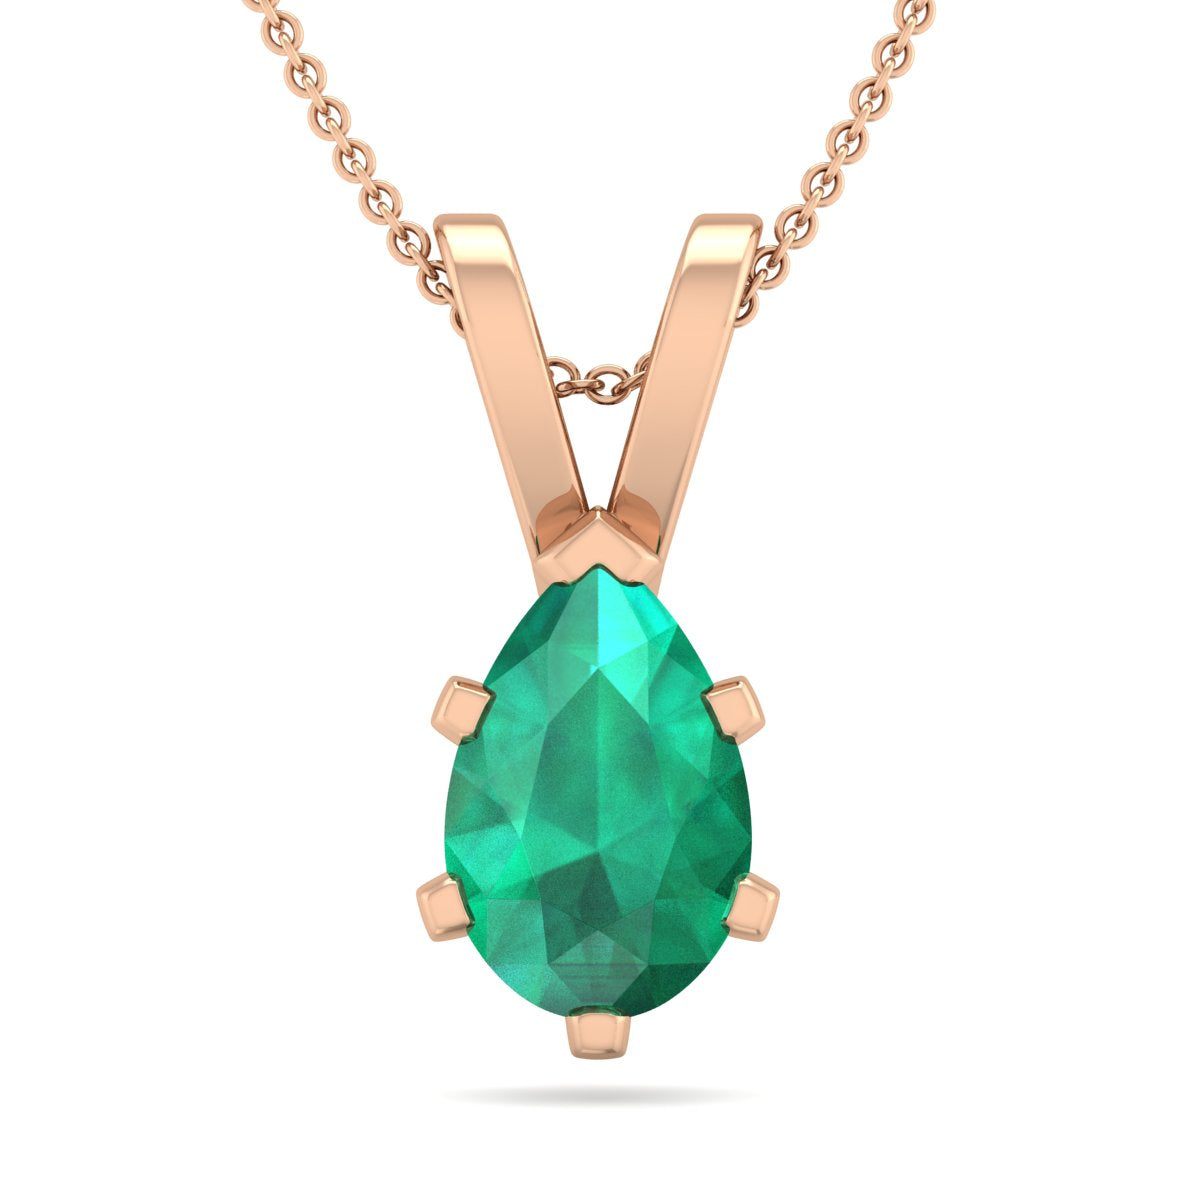 Sselects 3/4 Carat Pear Shape Emerald Necklaces In 14 Karat Rose Gold Over Sterling Chain In Silver